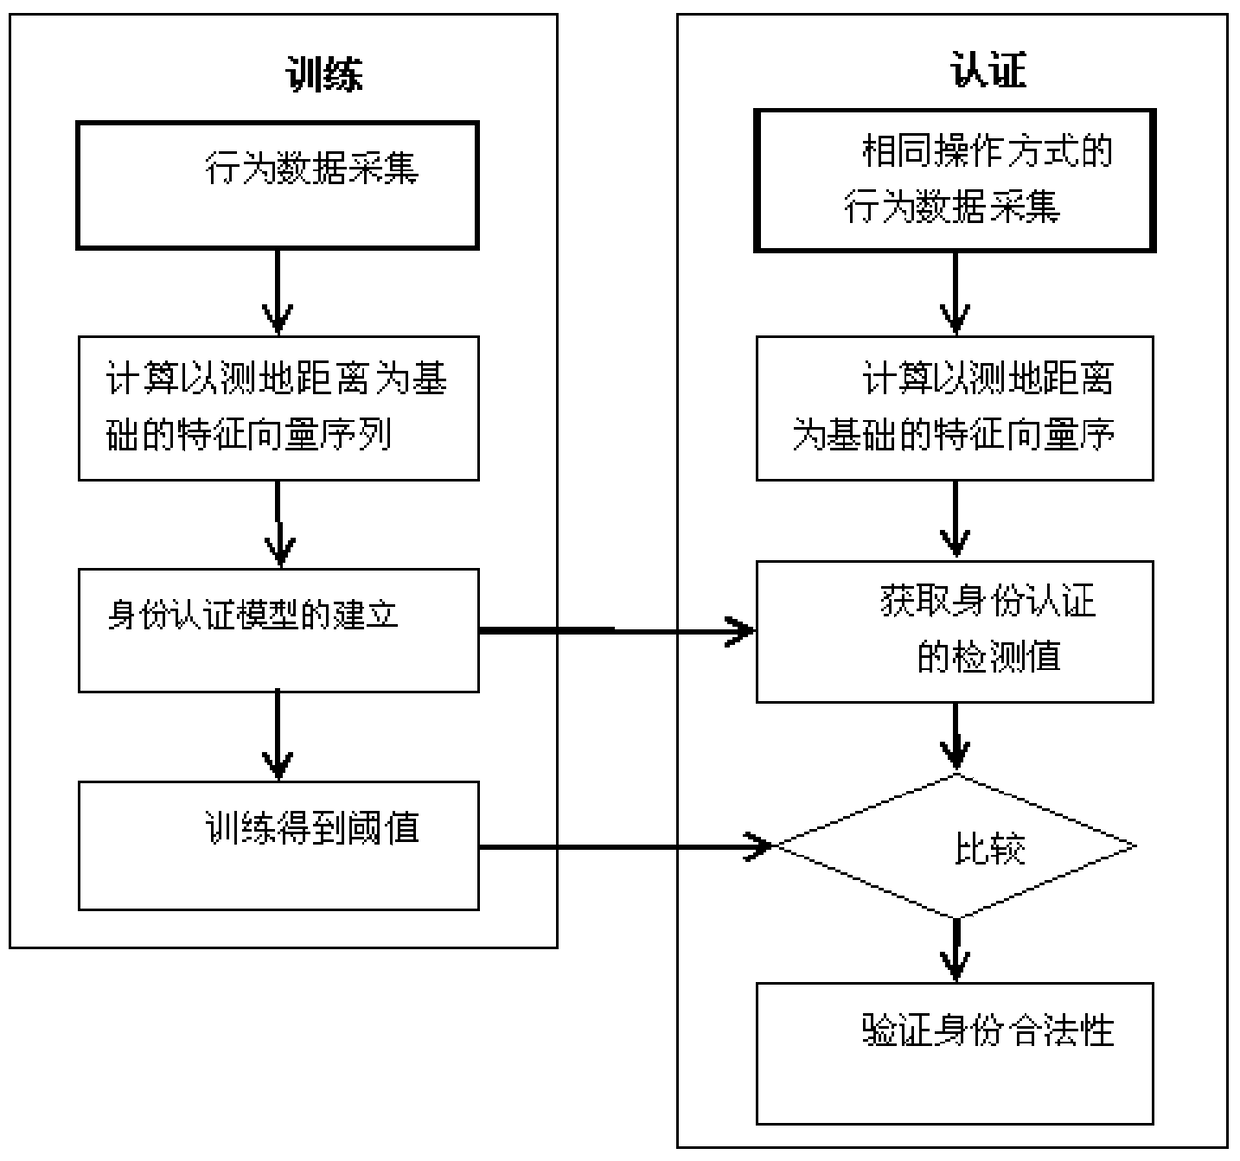 Mobile terminal user identity authentication method based on multi-finger touch behavior characteristics